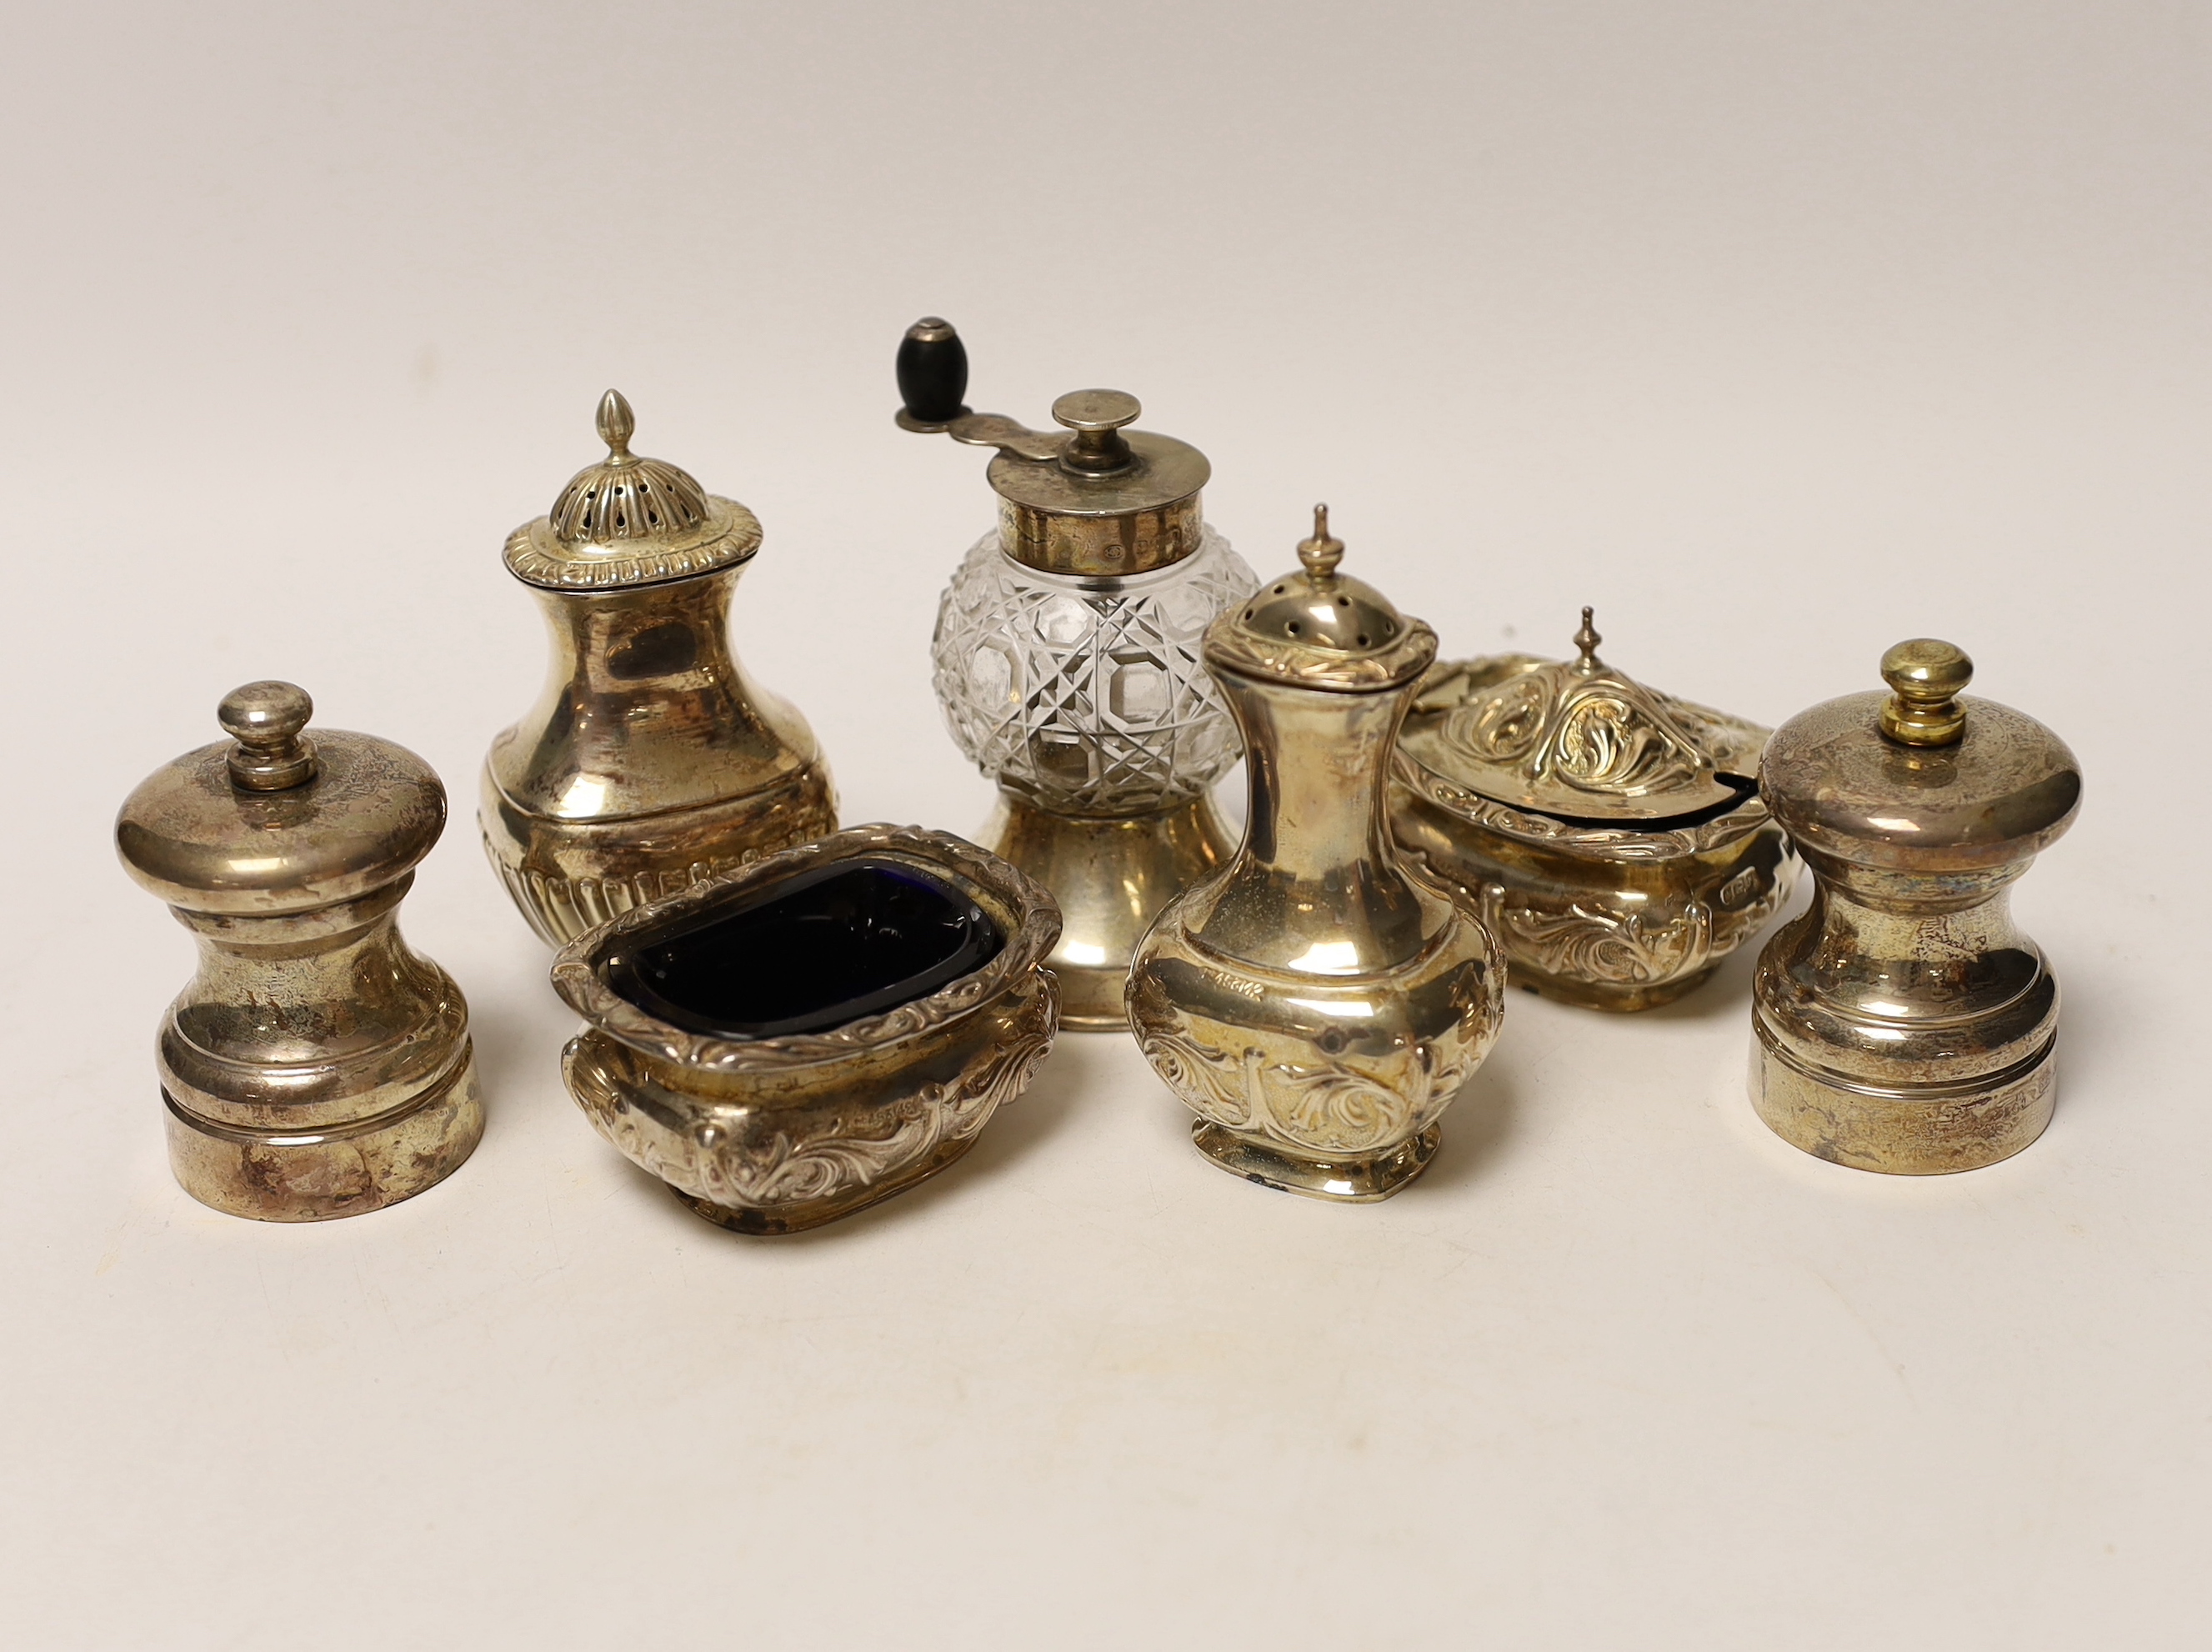 Seven assorted silver condiments, including a pepper grinder and salt and pepper mills.